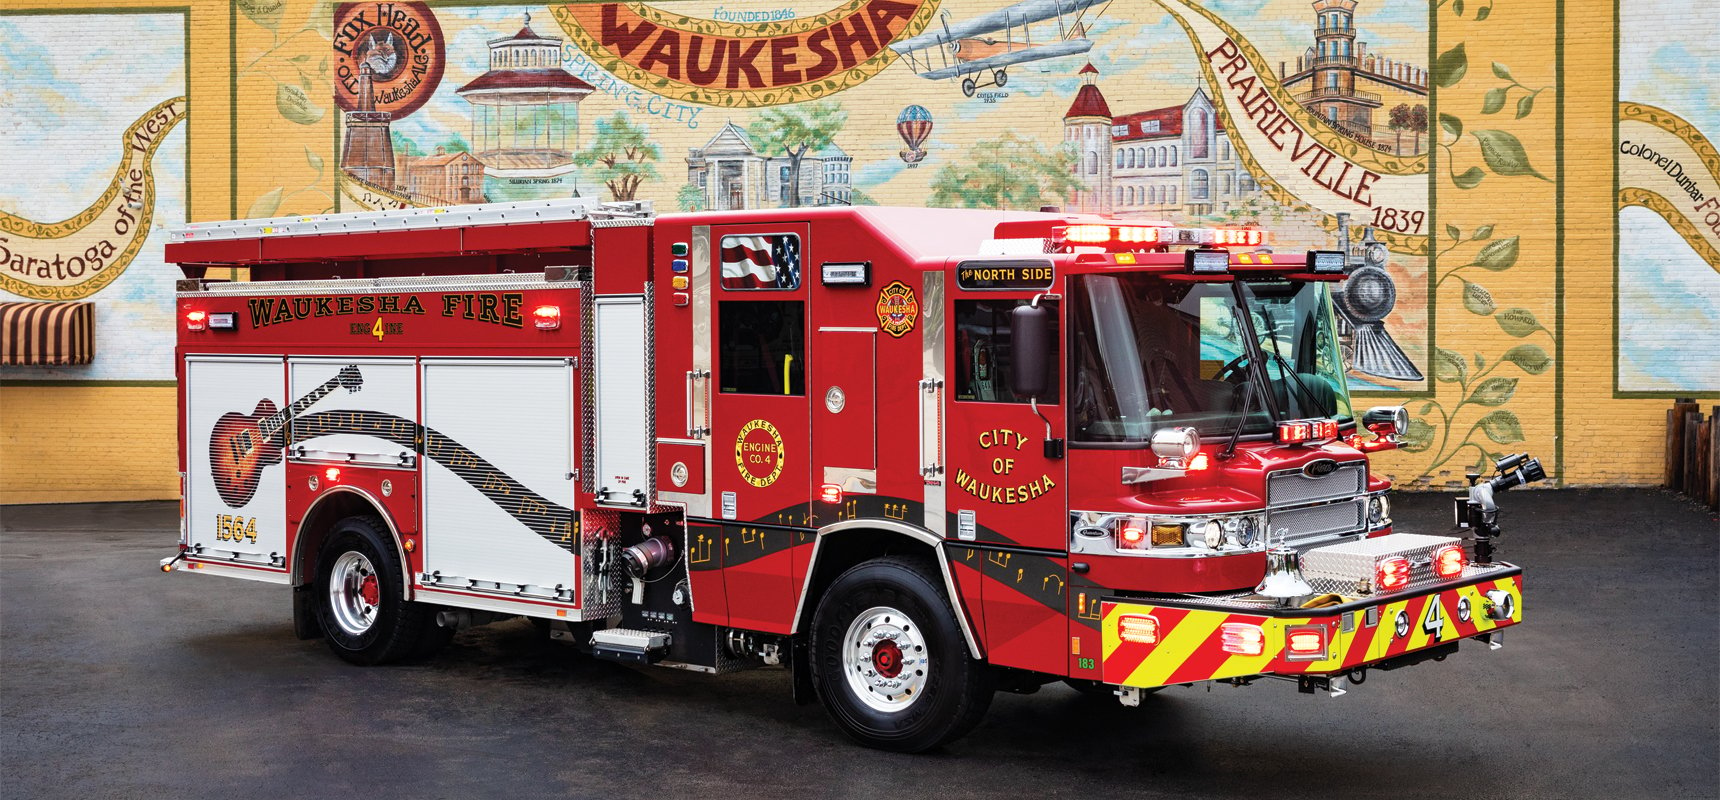 Pierce fire truck, with Les Paul guitar graphics, positioned in front of a historical and community themed mural downtown Waukesha, WI.